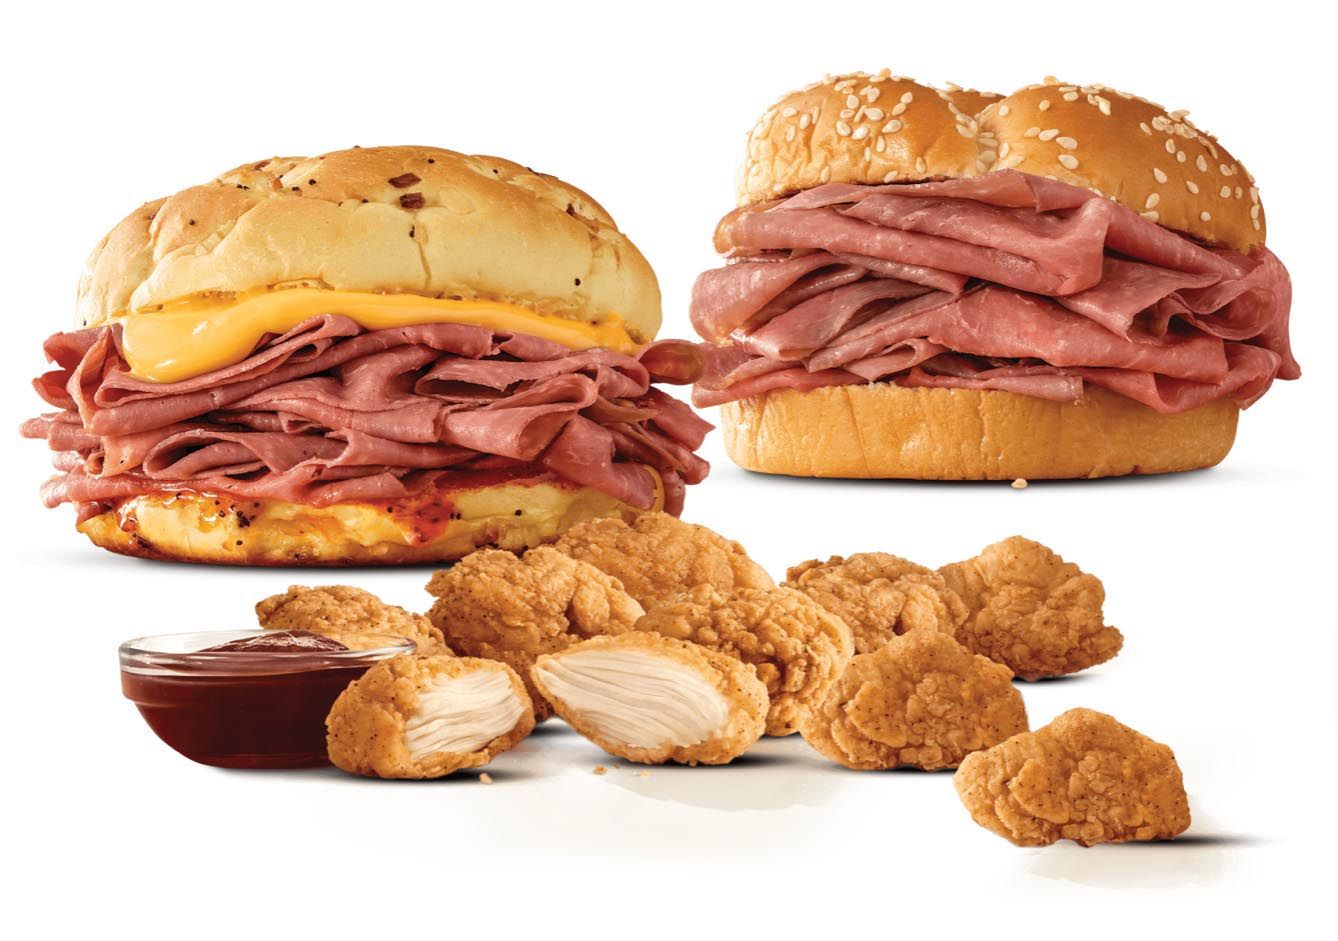 The Popular 2 for $6 Everyday Value Menu at Arby’s Gets a Limited Time Only Upgrade